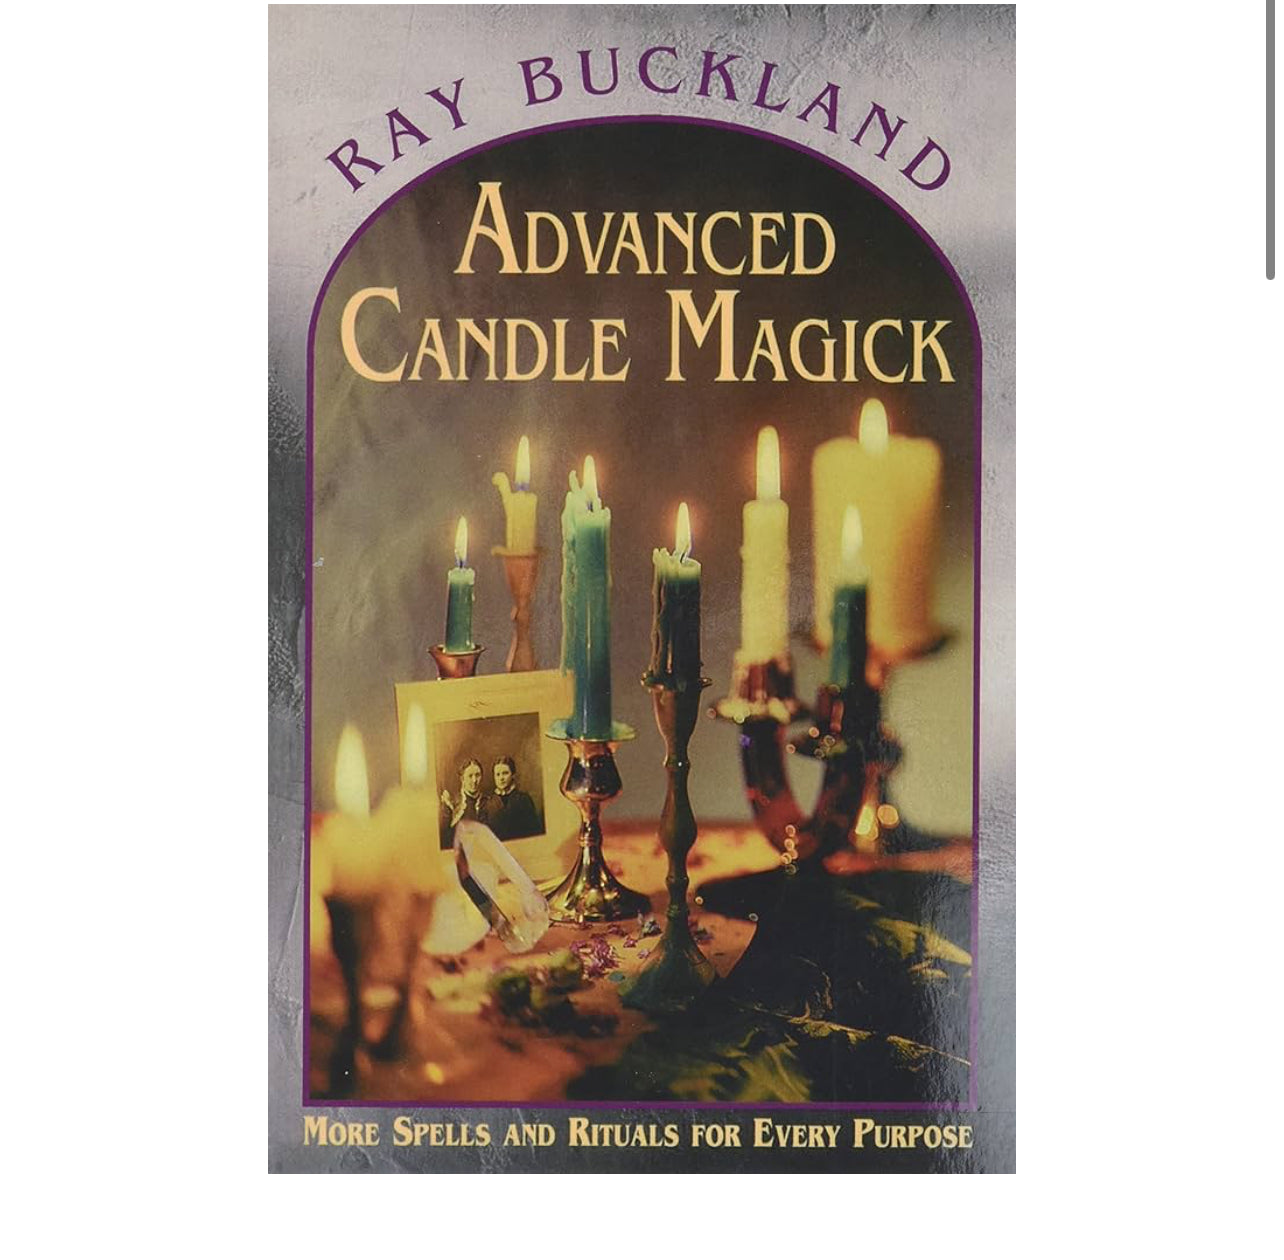 Advanced Candle Magick: More Spells and Rituals for Every Purpose